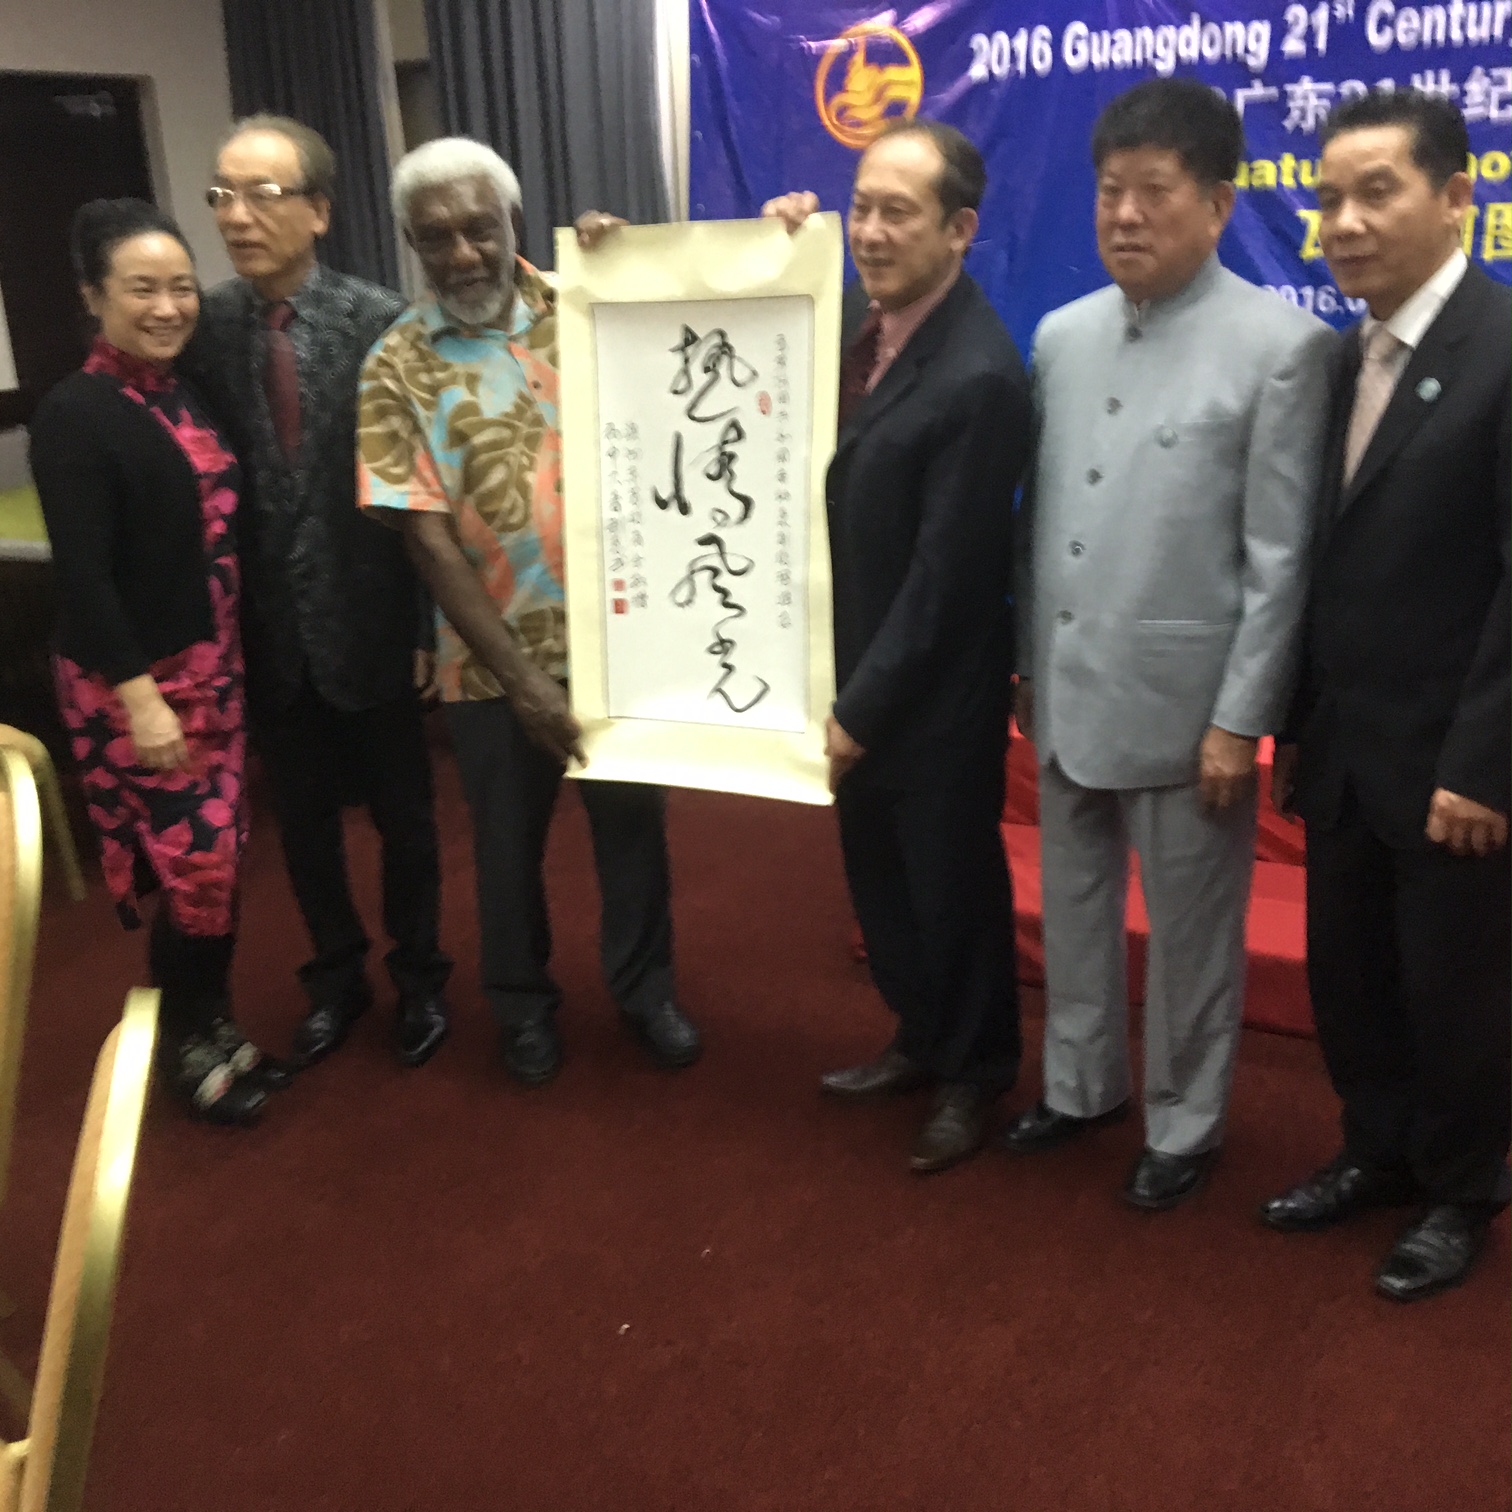 Mr David Luu presenting a Chinese scroll message to Deputy Prime Minster Joe Natuman.  With His Excellency Ambassdor Lui Quan, leading business couple Mr and Mrs Lin, and the President of the Sydney Chapter of the World Wide Dongguan Entrepeneurs Federation.